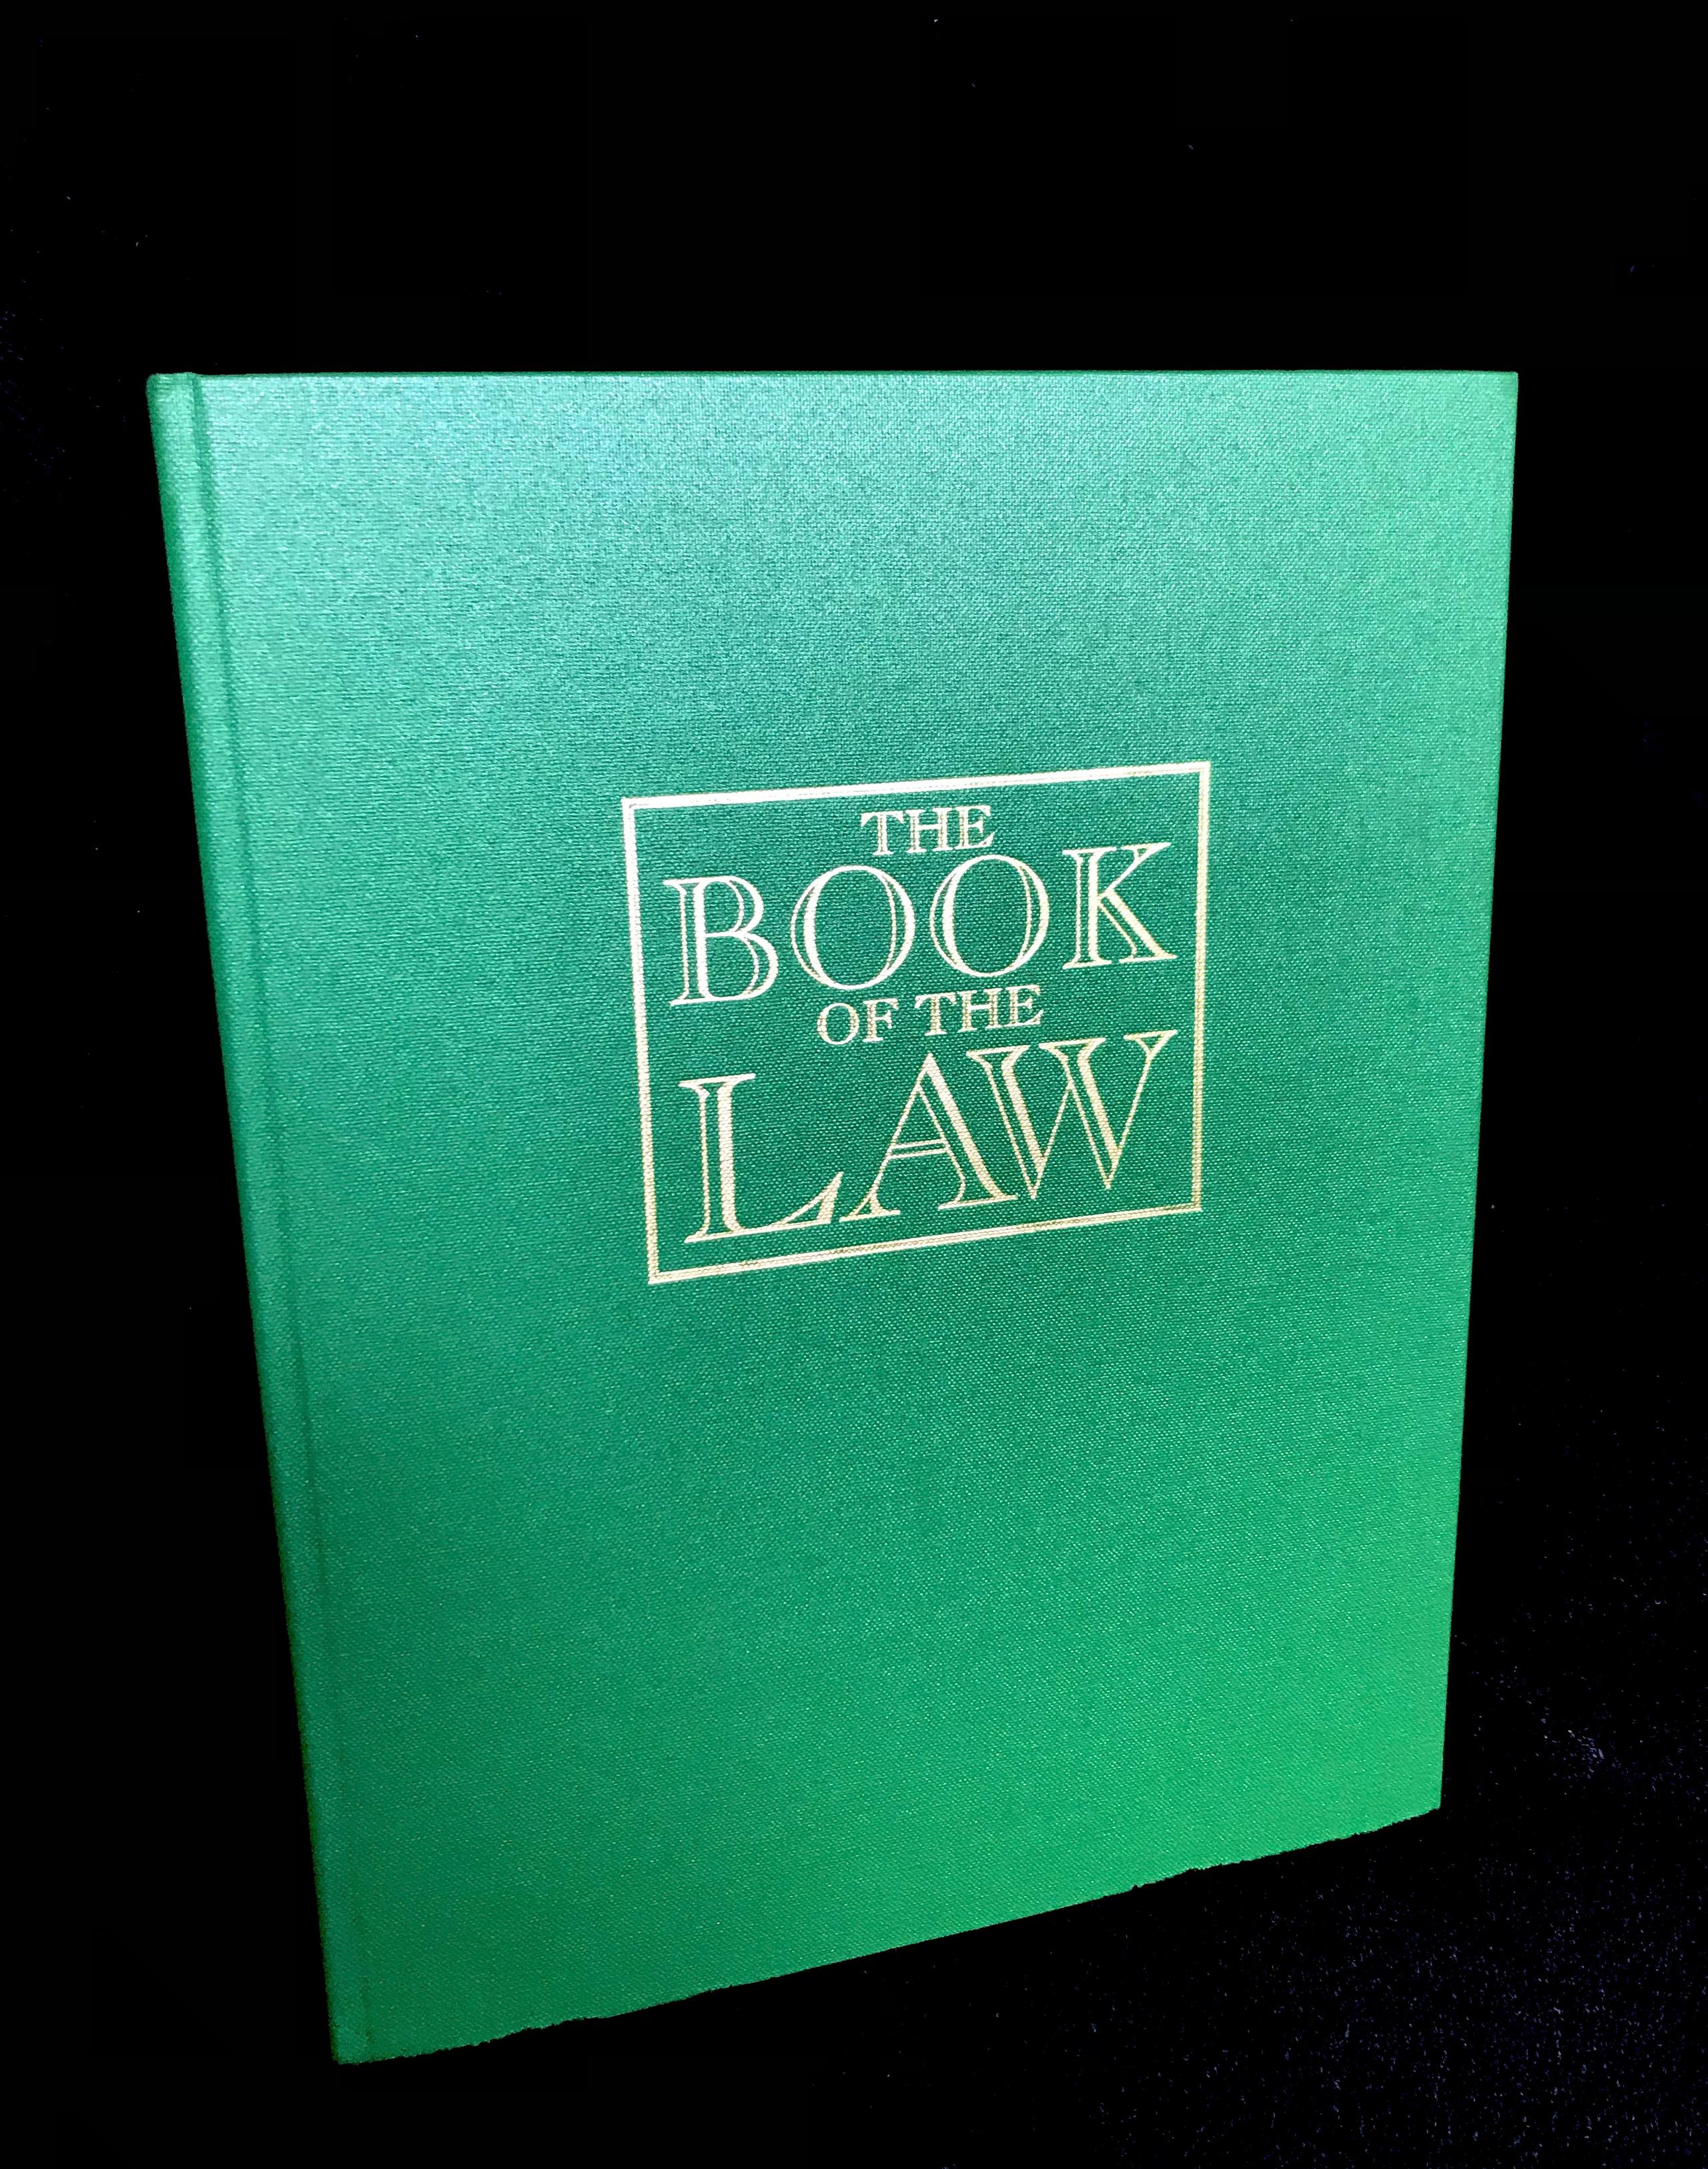 The Book Of The Law, The Illuminated Edition by Aleister Crowley, Illustrated by Susan Jameson